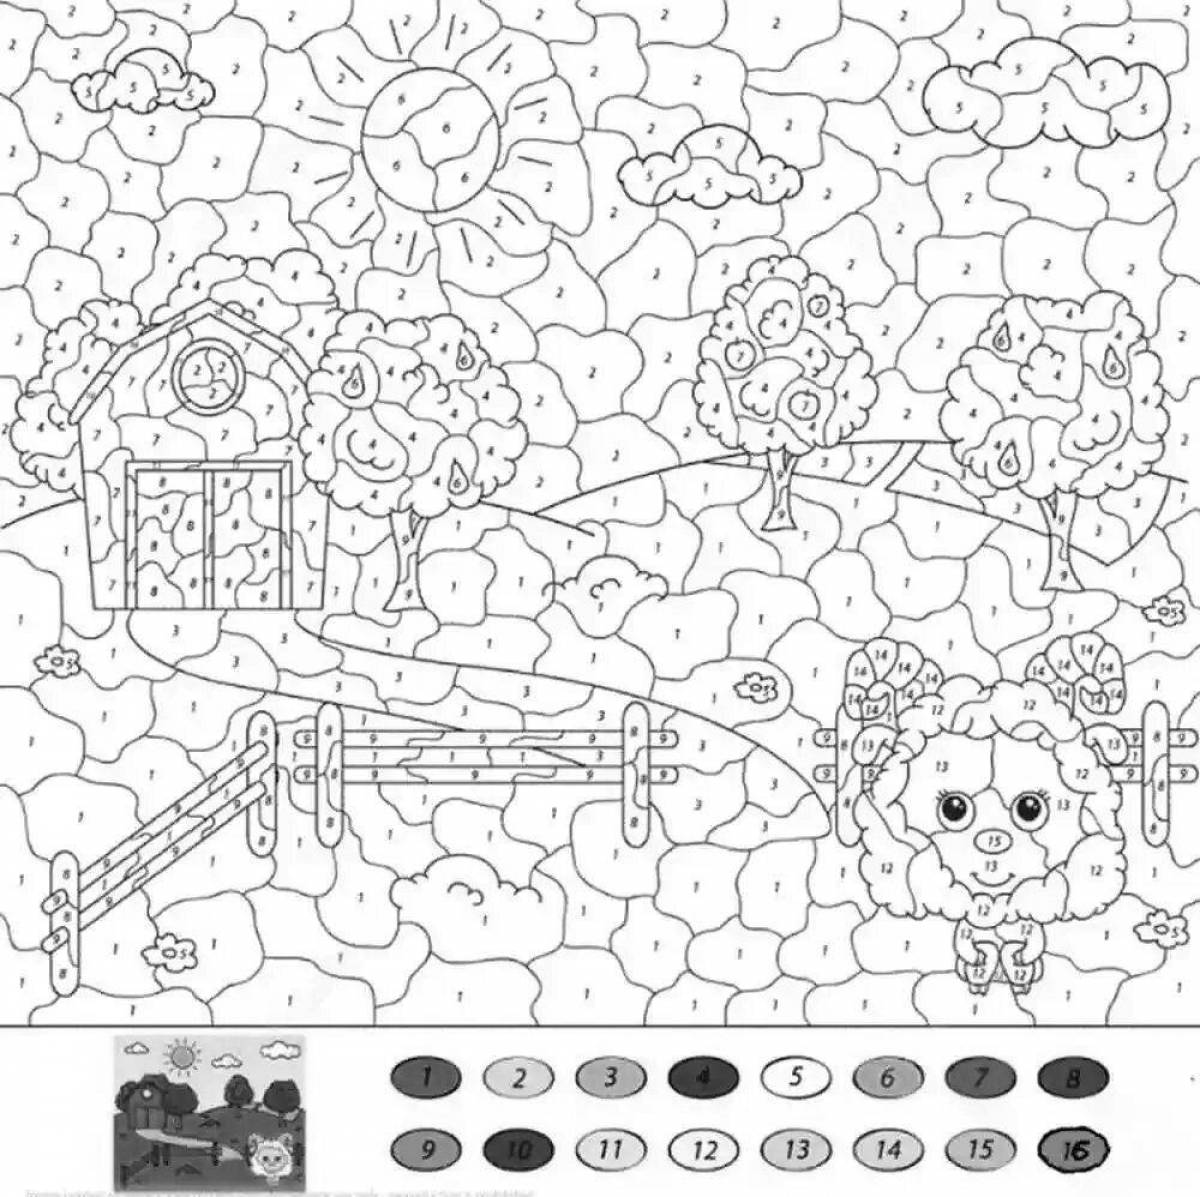 Trashbox games coloring pages